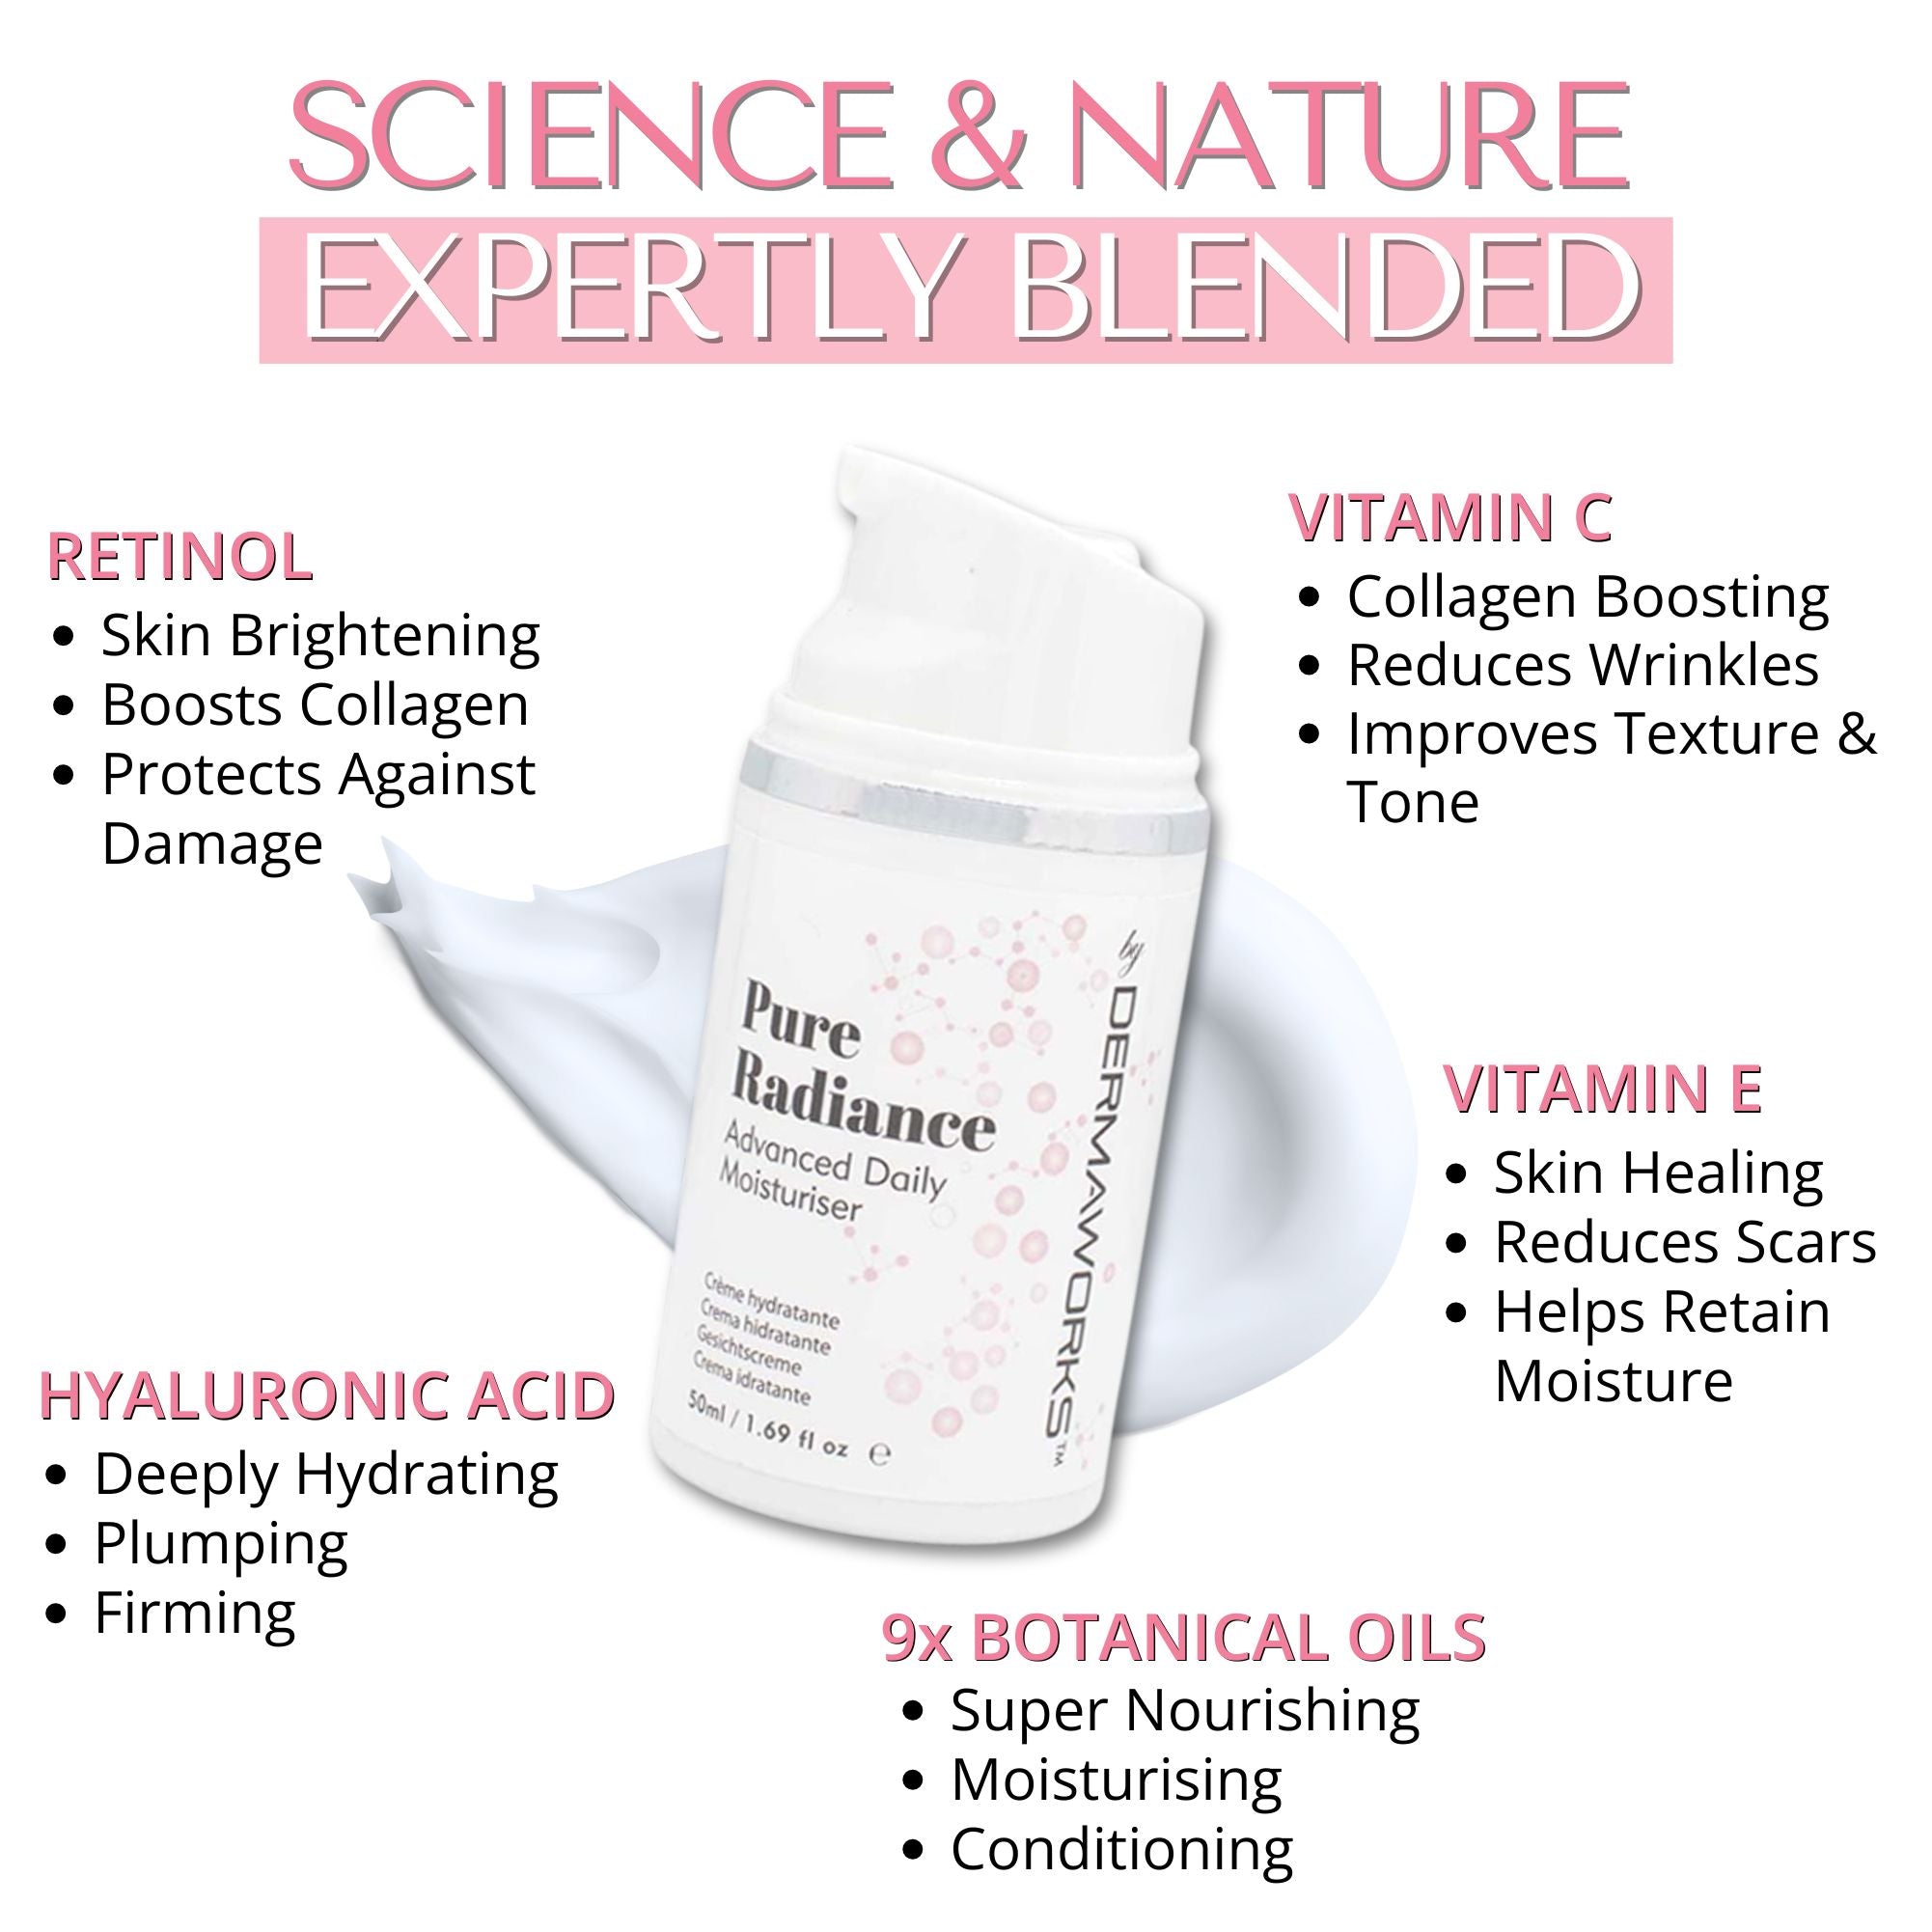 Pure Radiance A, C & E anti-wrinkle moisturiser with hyaluronic acid is deeply hydrating, skin firming and plumping, skin healing and brightening.